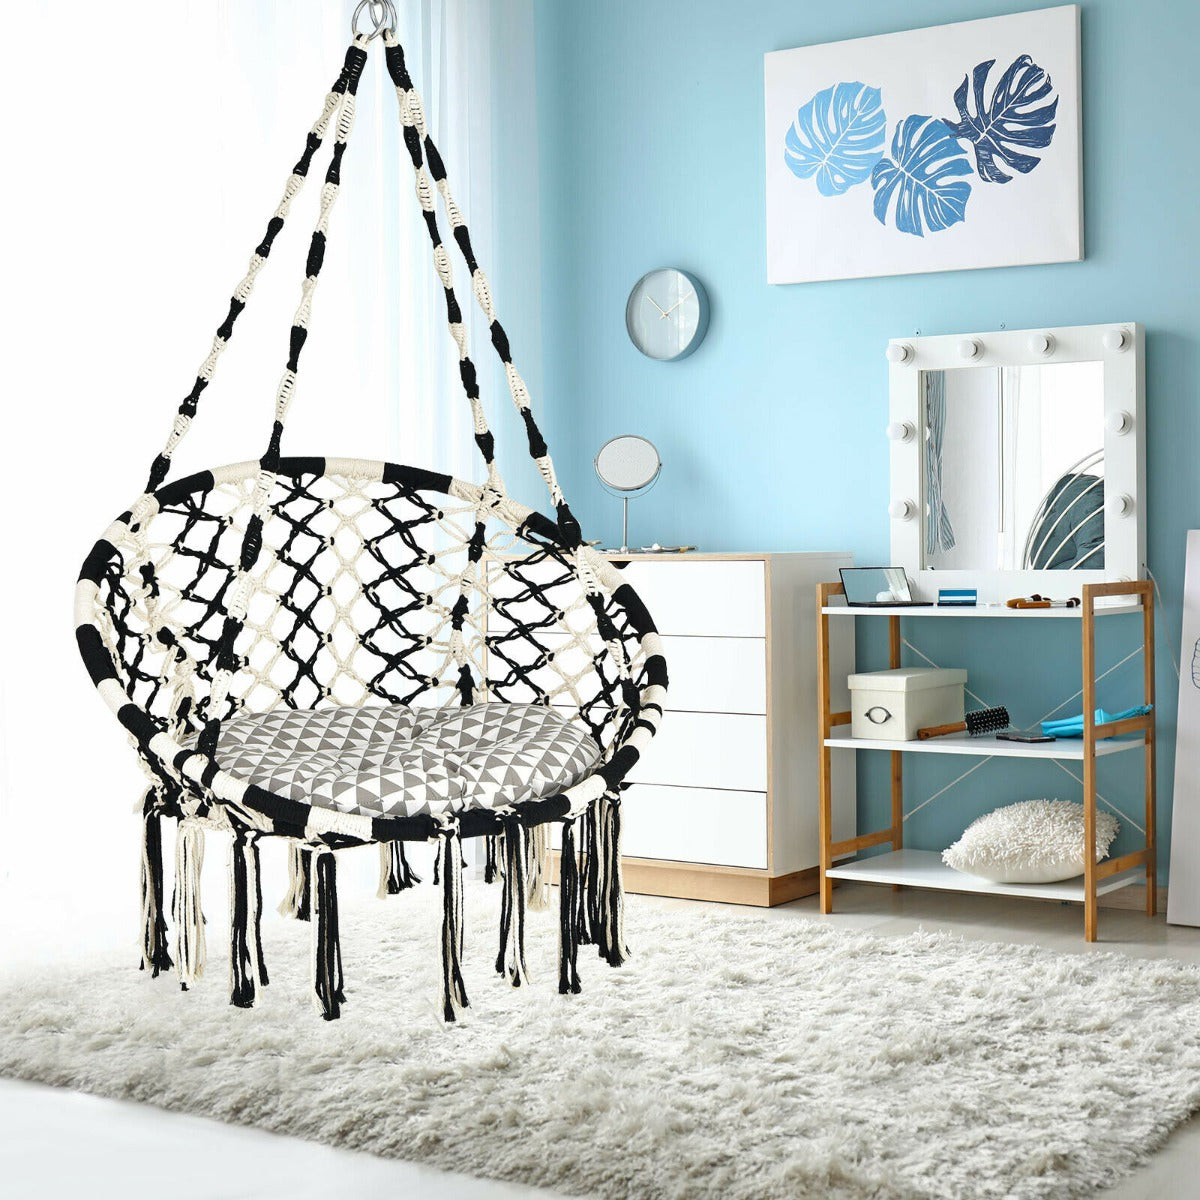 Cotton Weave Relax Swing Chair with Soft Cushion and Fringes